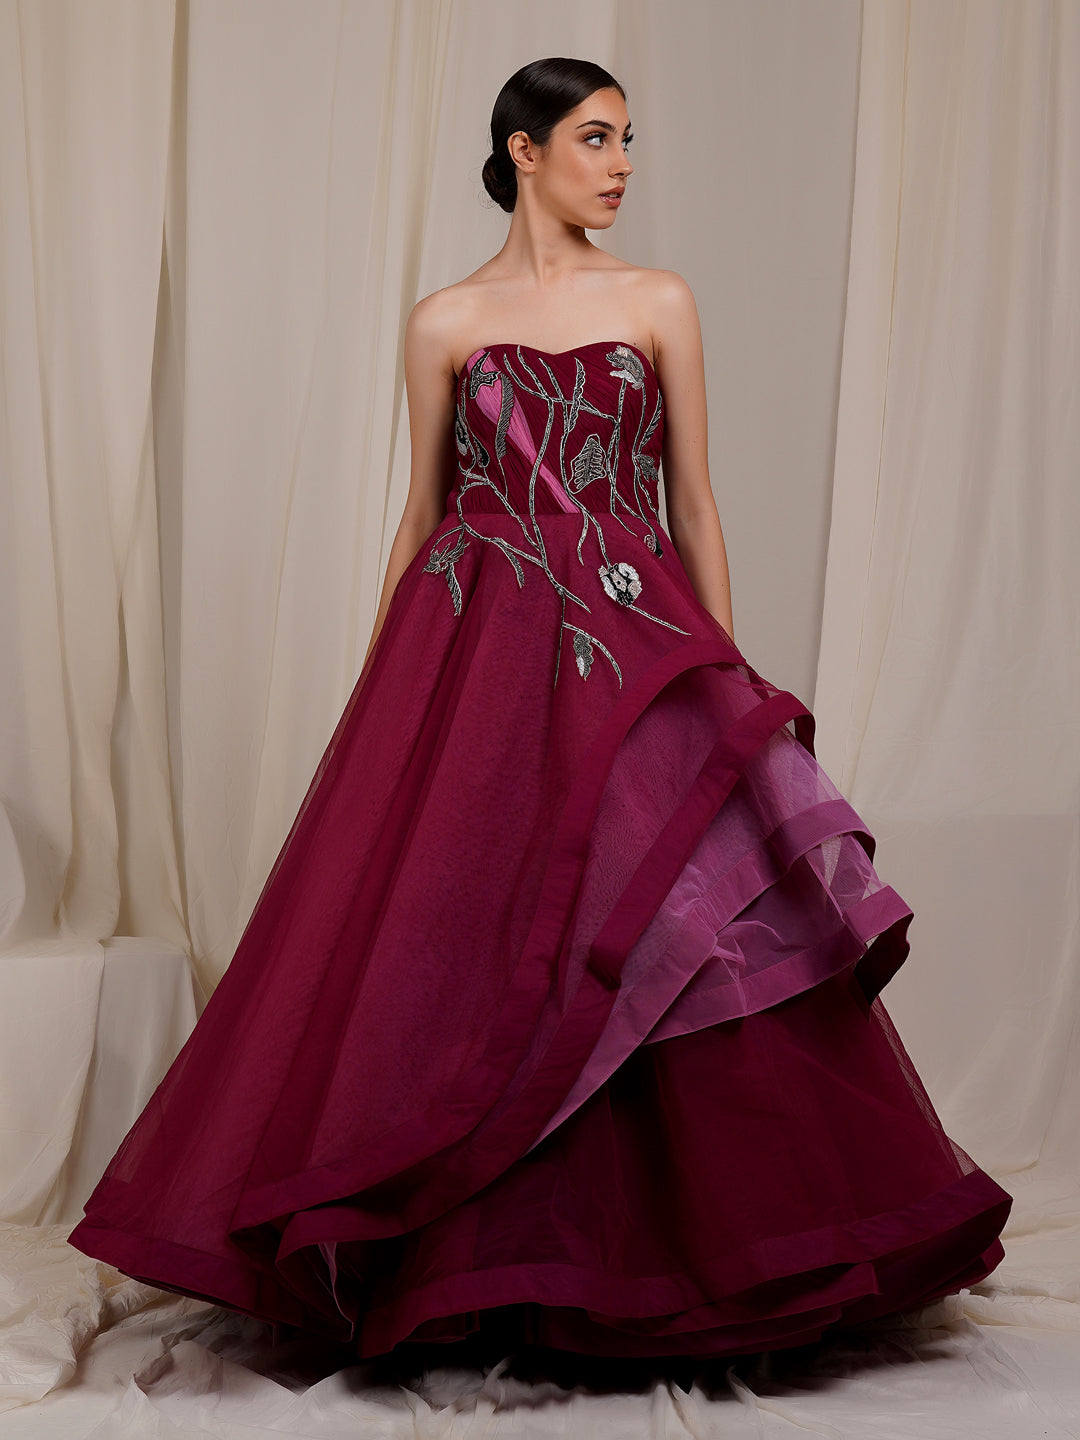 Featured Here Is A move Princess Cotton Silk And Net Gown